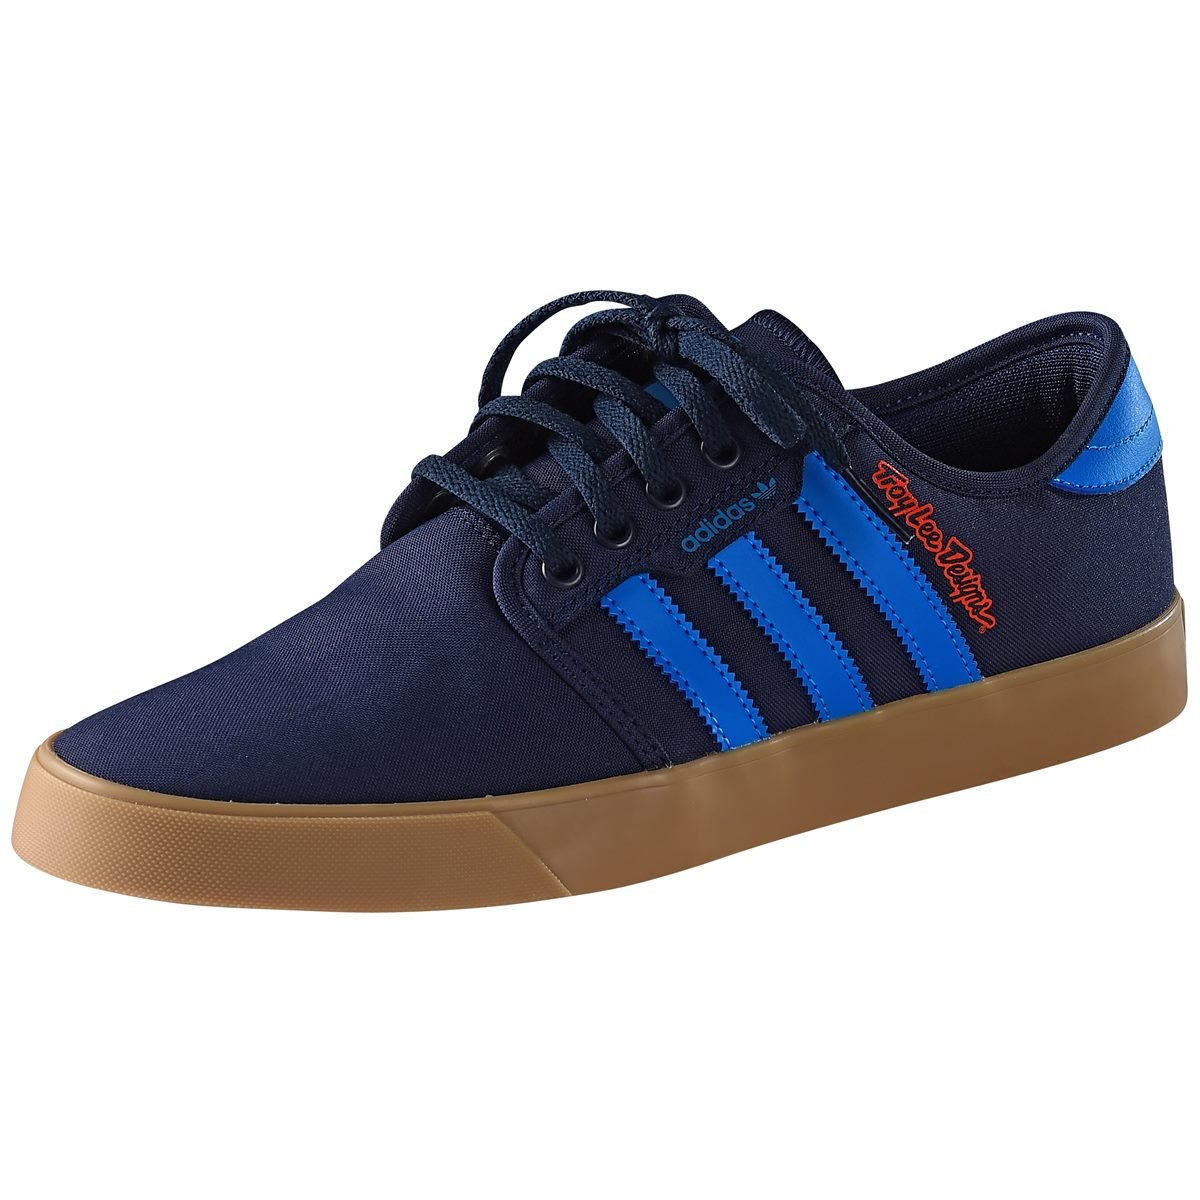 Troy Lee Designs Chaussures Team TLD X Adidas Navy